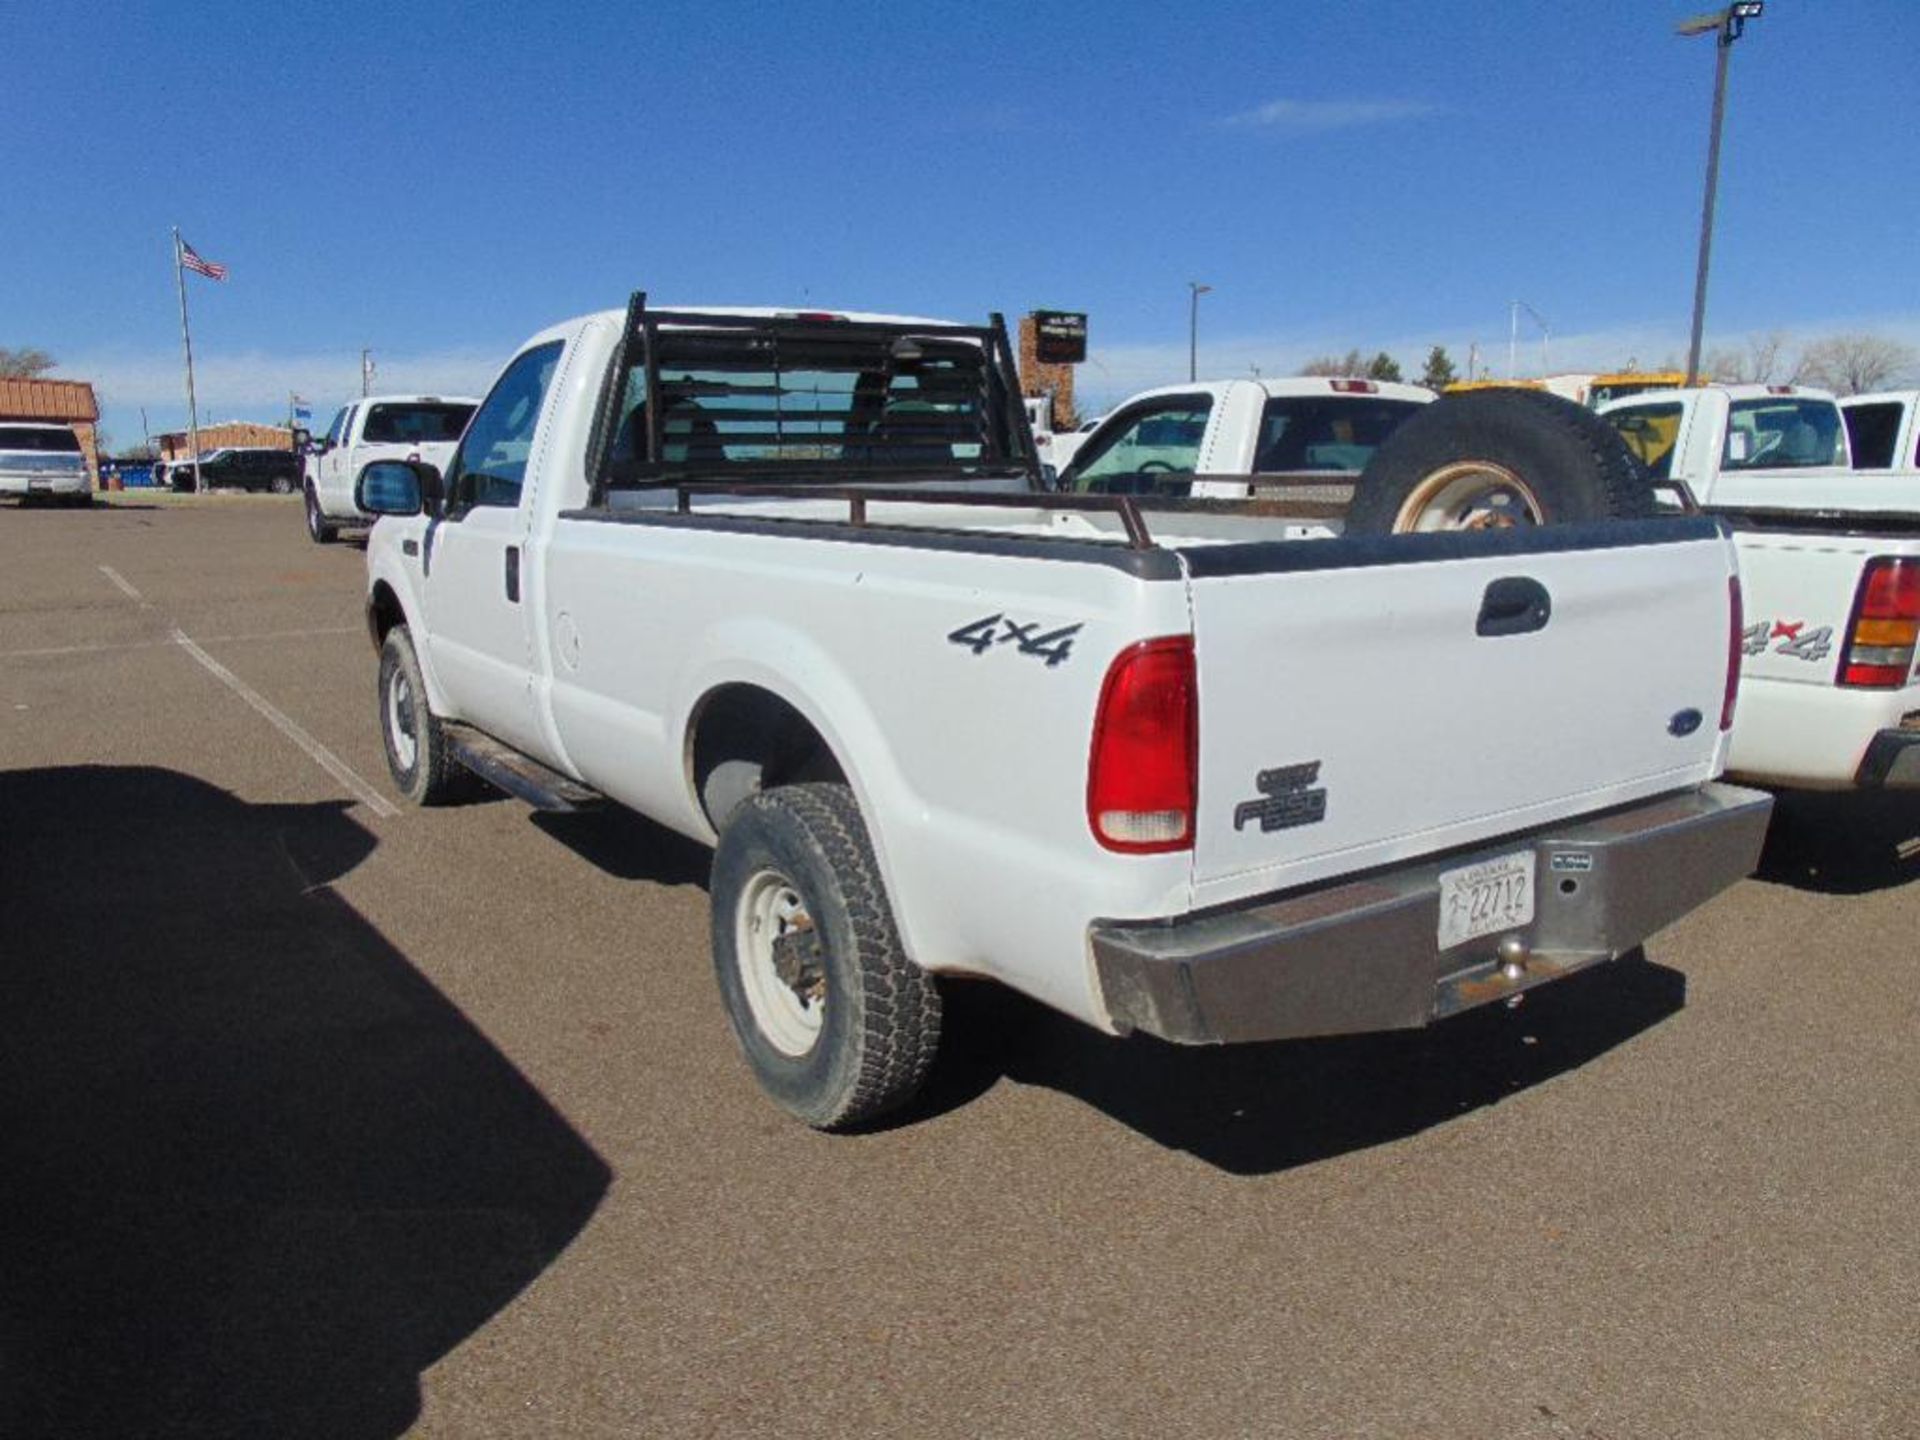 2003 Ford F250 4x4 Pickup s/n 1ftnf21l23ed85660,v8 gas eng, 5 spd trans, od reads 82224 miles, - Image 2 of 3